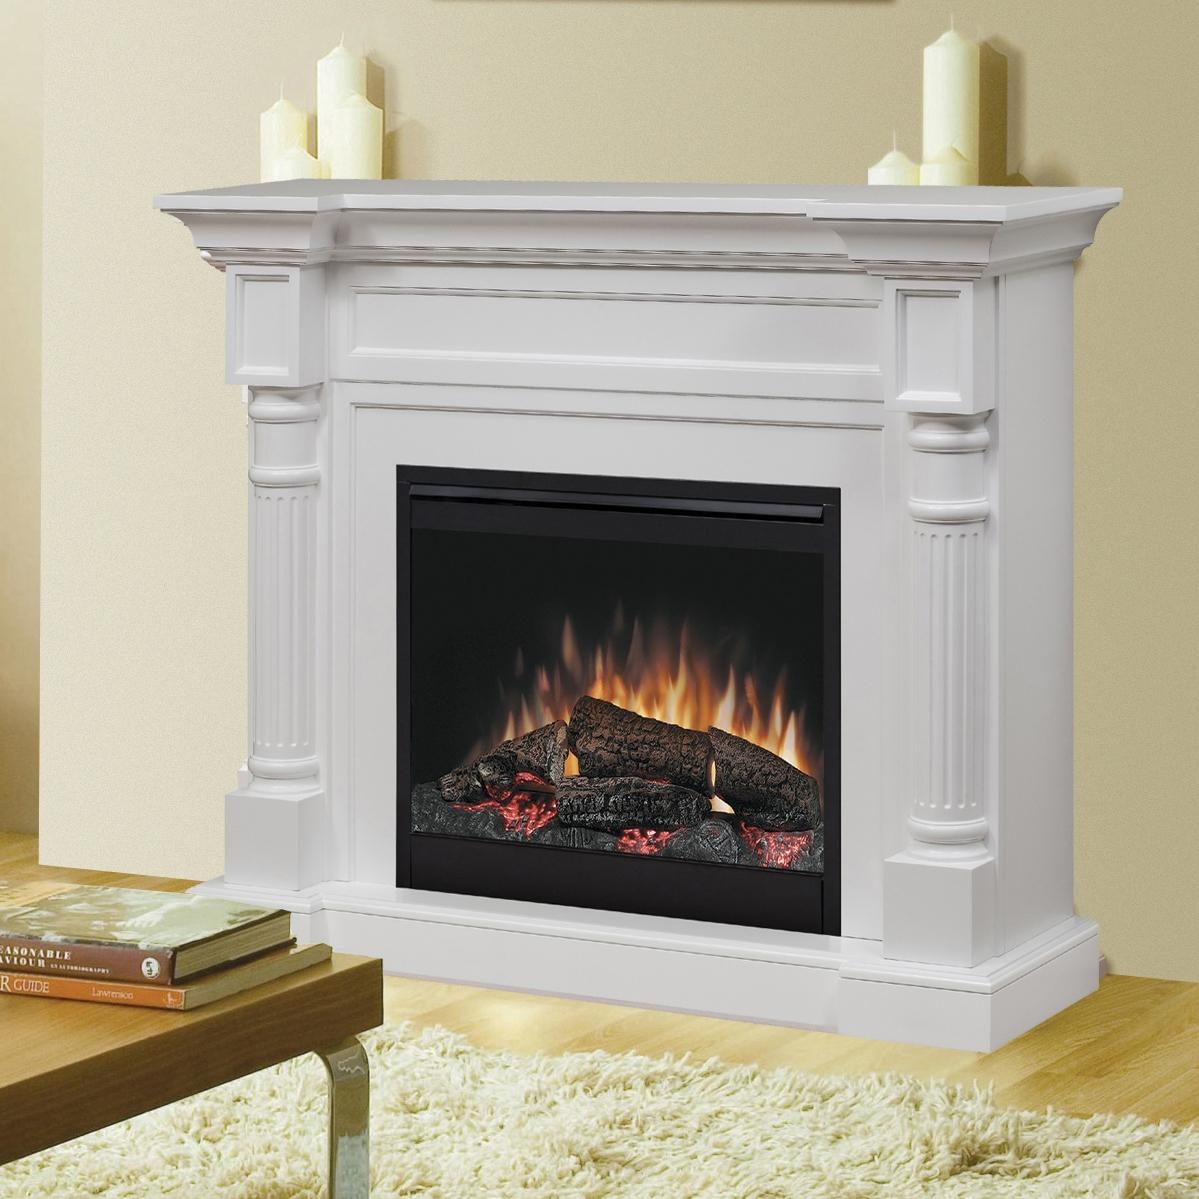 Temco Fireplace Products Luxury 62 Electric Fireplace Charming Fireplace